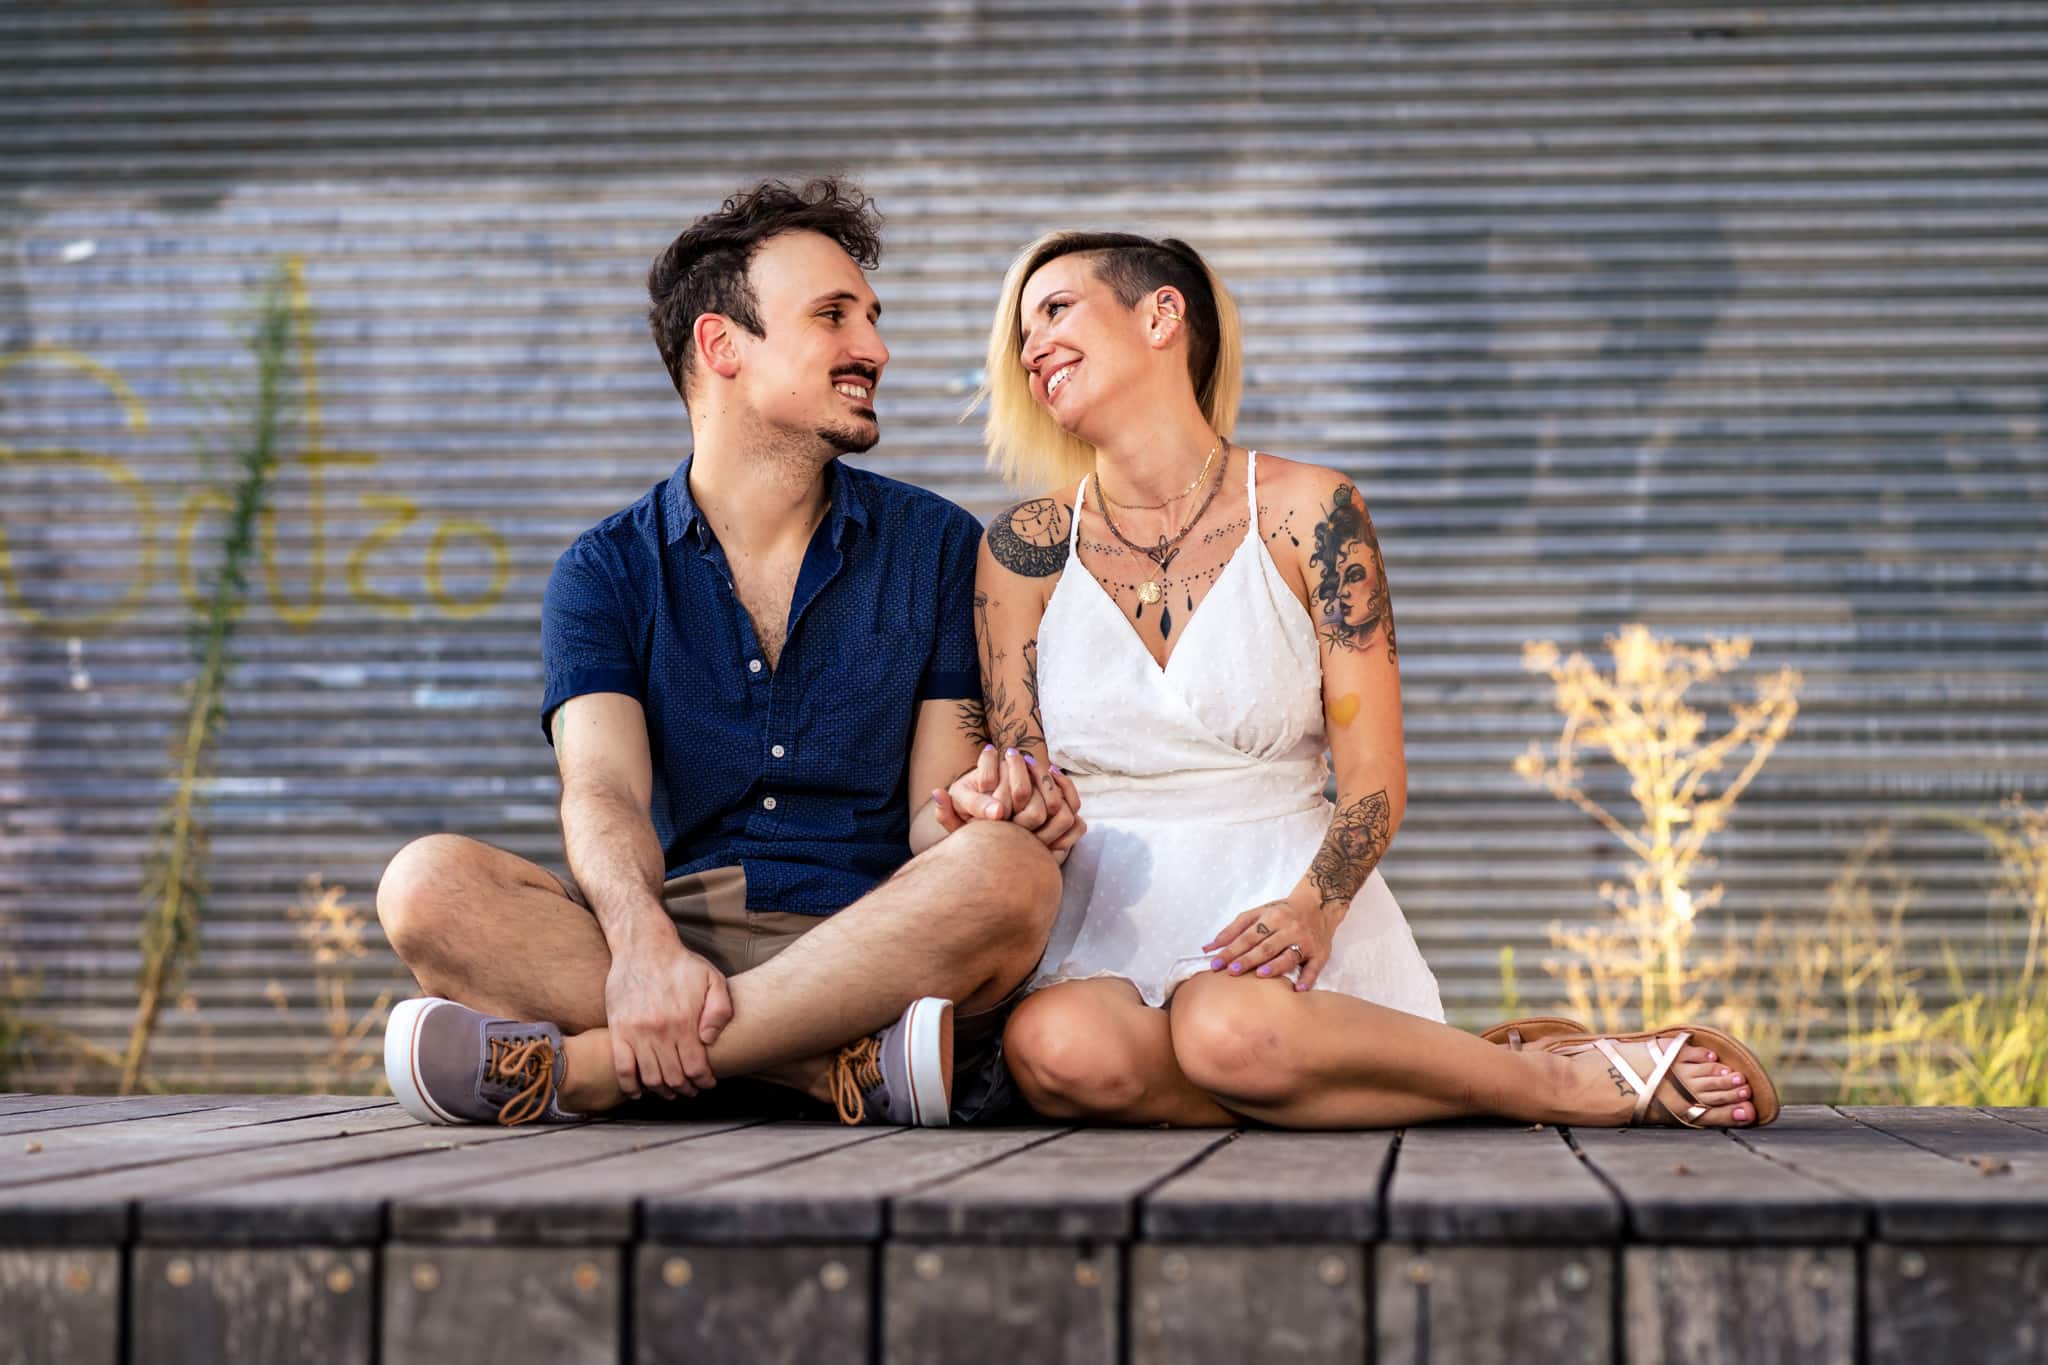 Downtown Raleigh warehouse district is a great engagement photo location | photos by Kivus & Camera